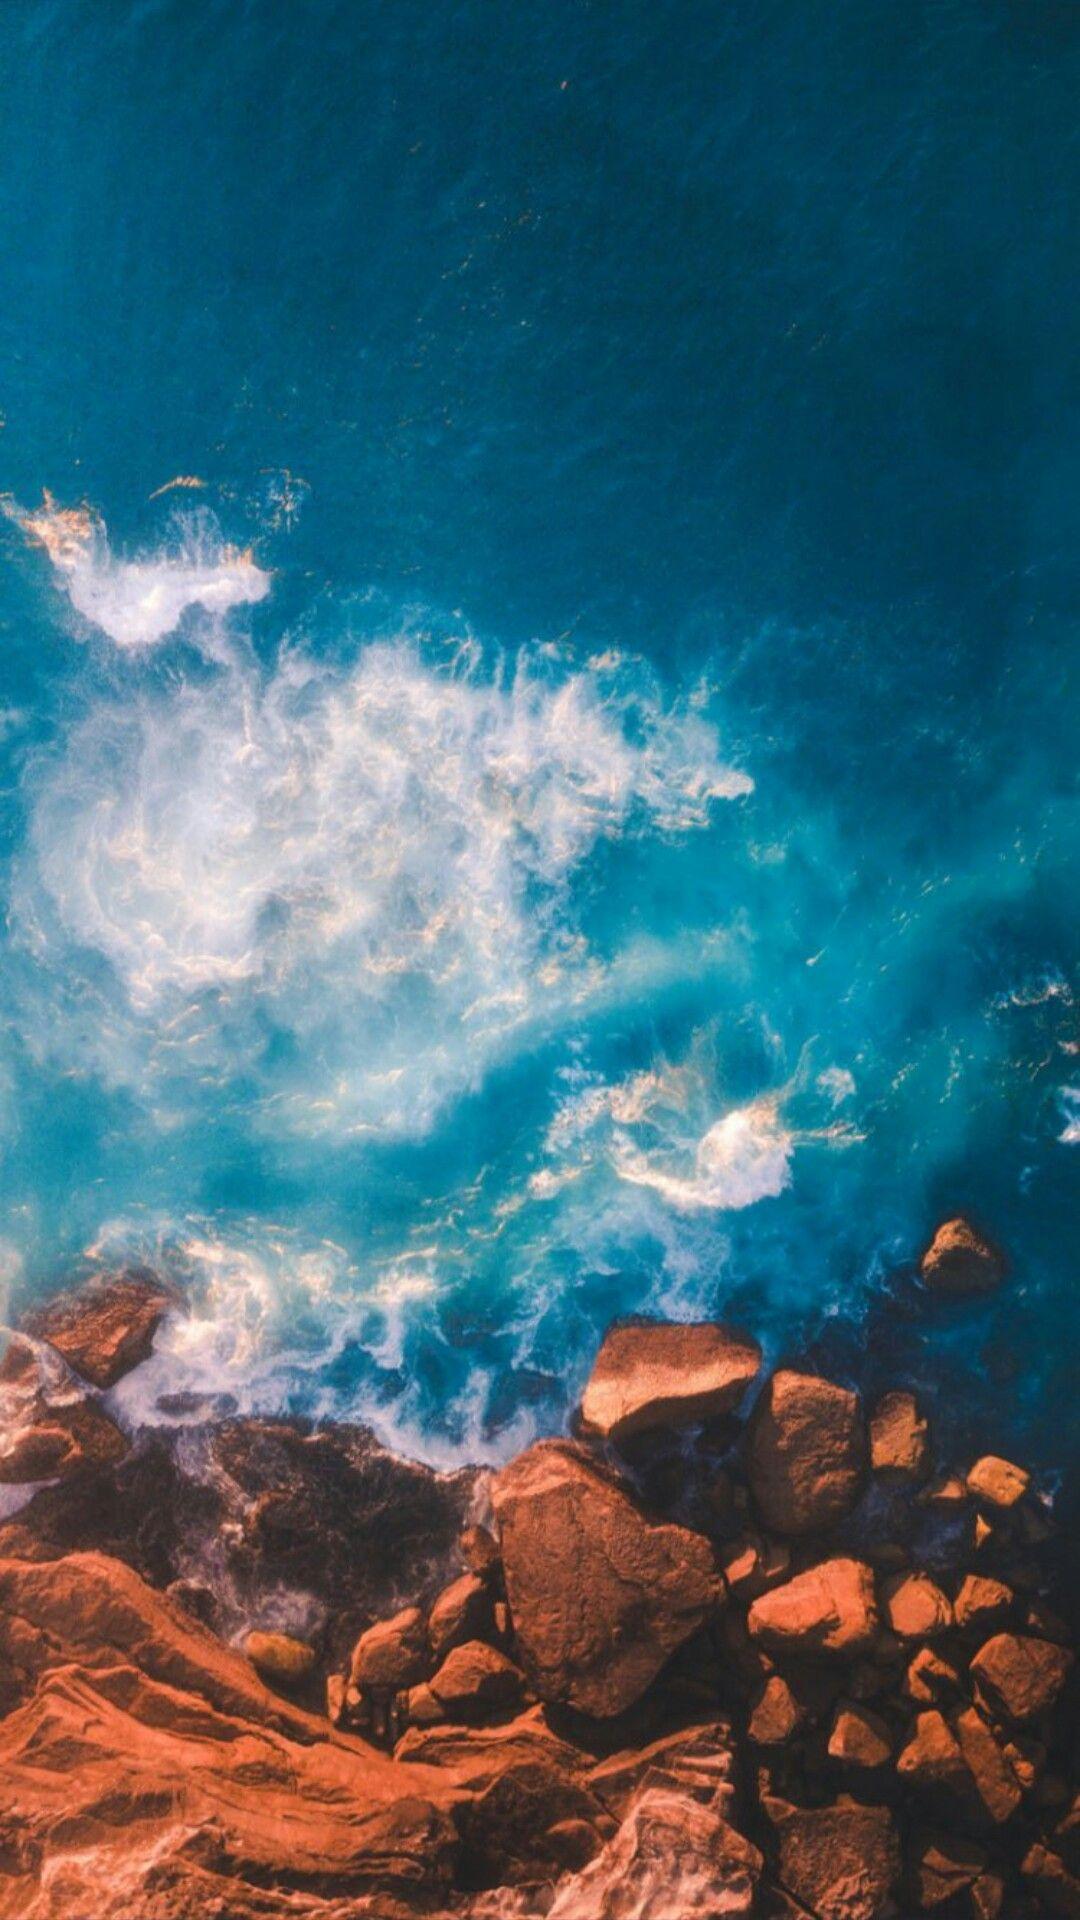 Aerial view of the ocean - Water, pretty